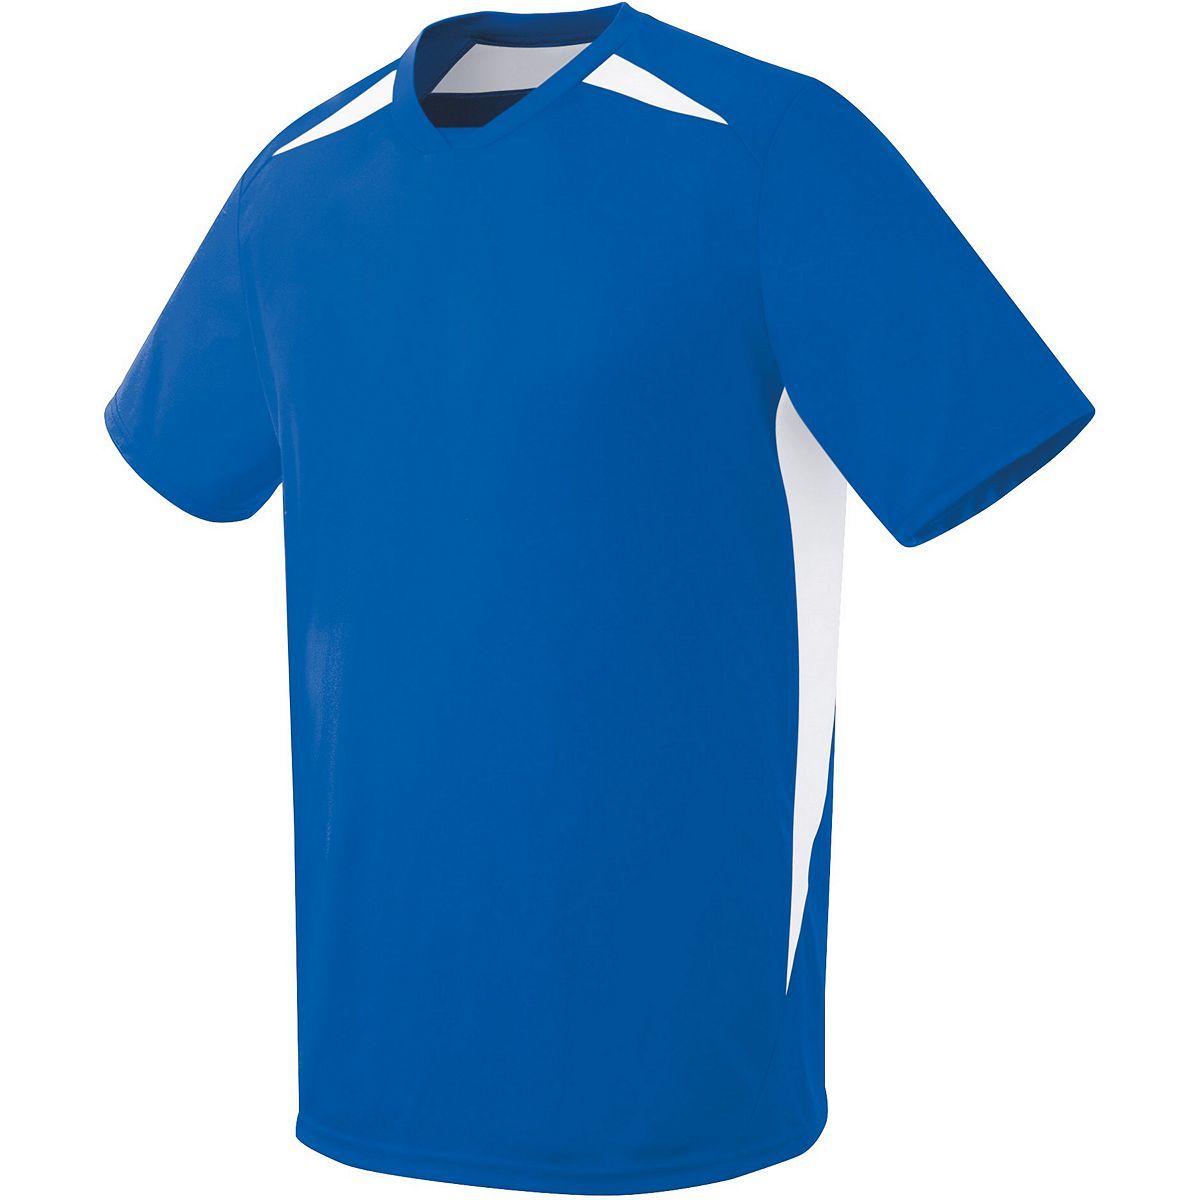 High 5 Adult Hawk Jersey in Royal/White  -Part of the Adult, Adult-Jersey, High5-Products, Soccer, Shirts, All-Sports-1 product lines at KanaleyCreations.com